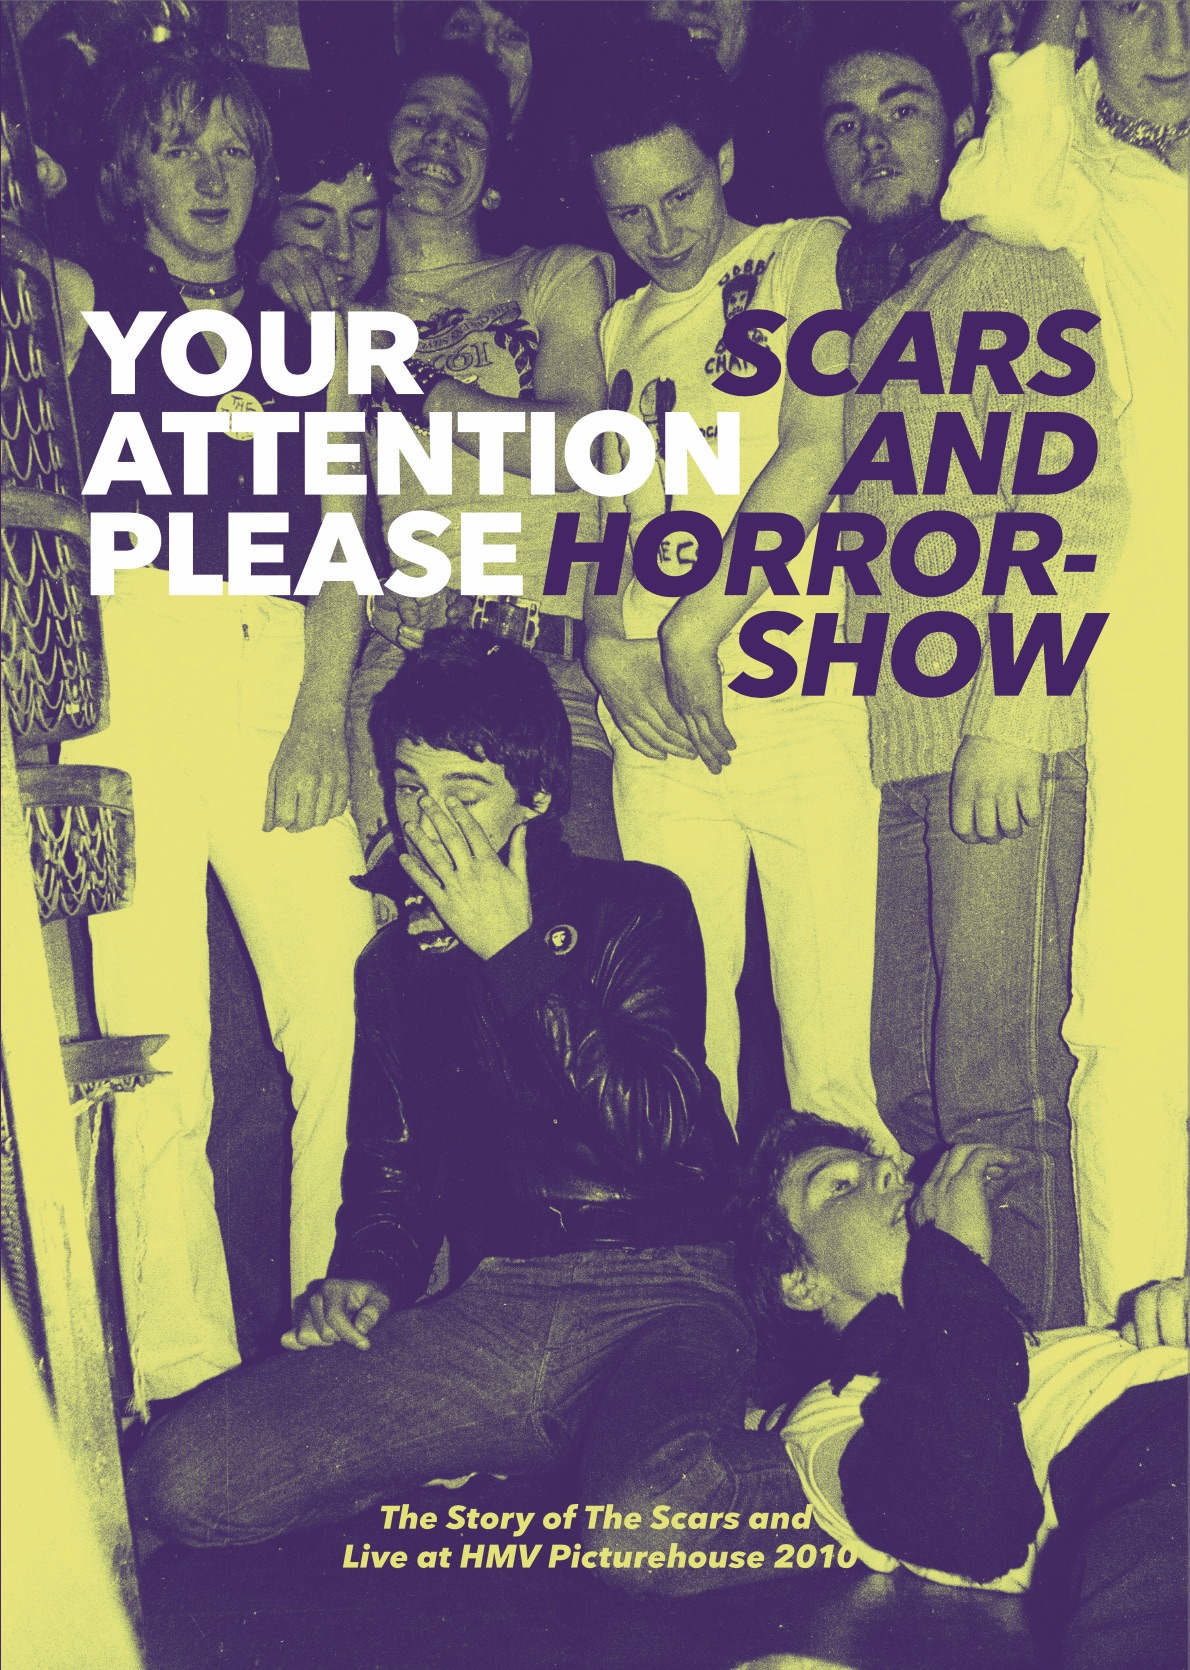 Your Attention Please: Scars